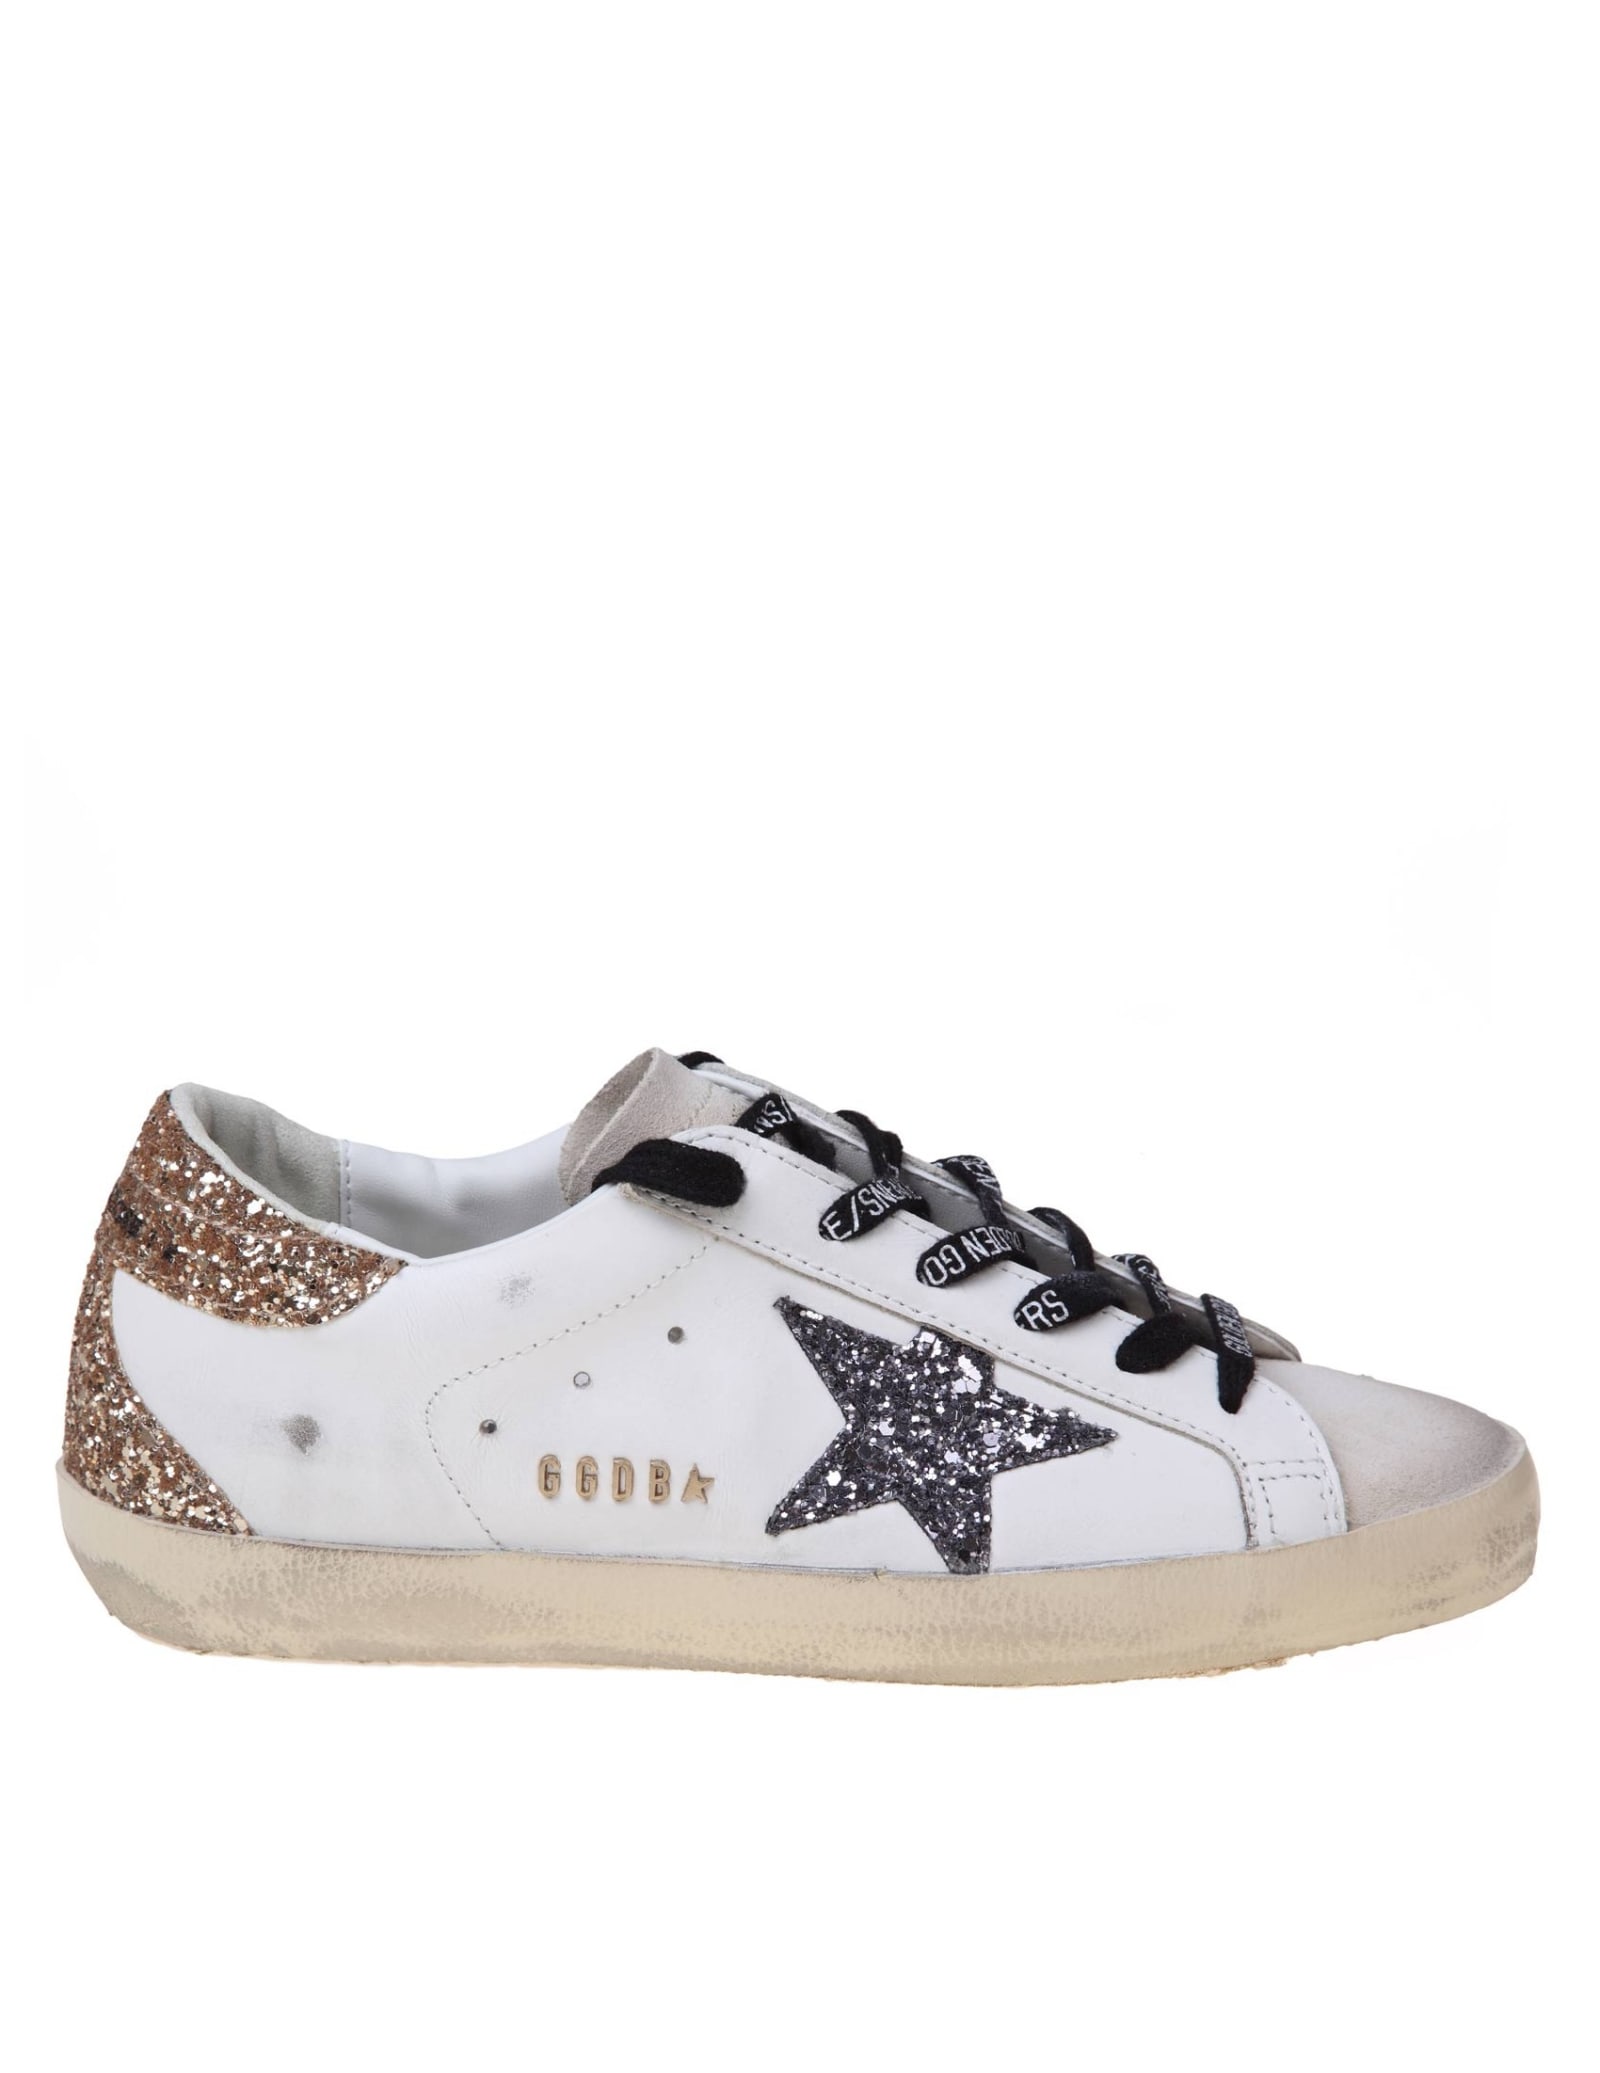 GOLDEN GOOSE GOLDEN GOOSE SUPER-STAR LEATHER SNEAKERS WITH GLITTER STAR